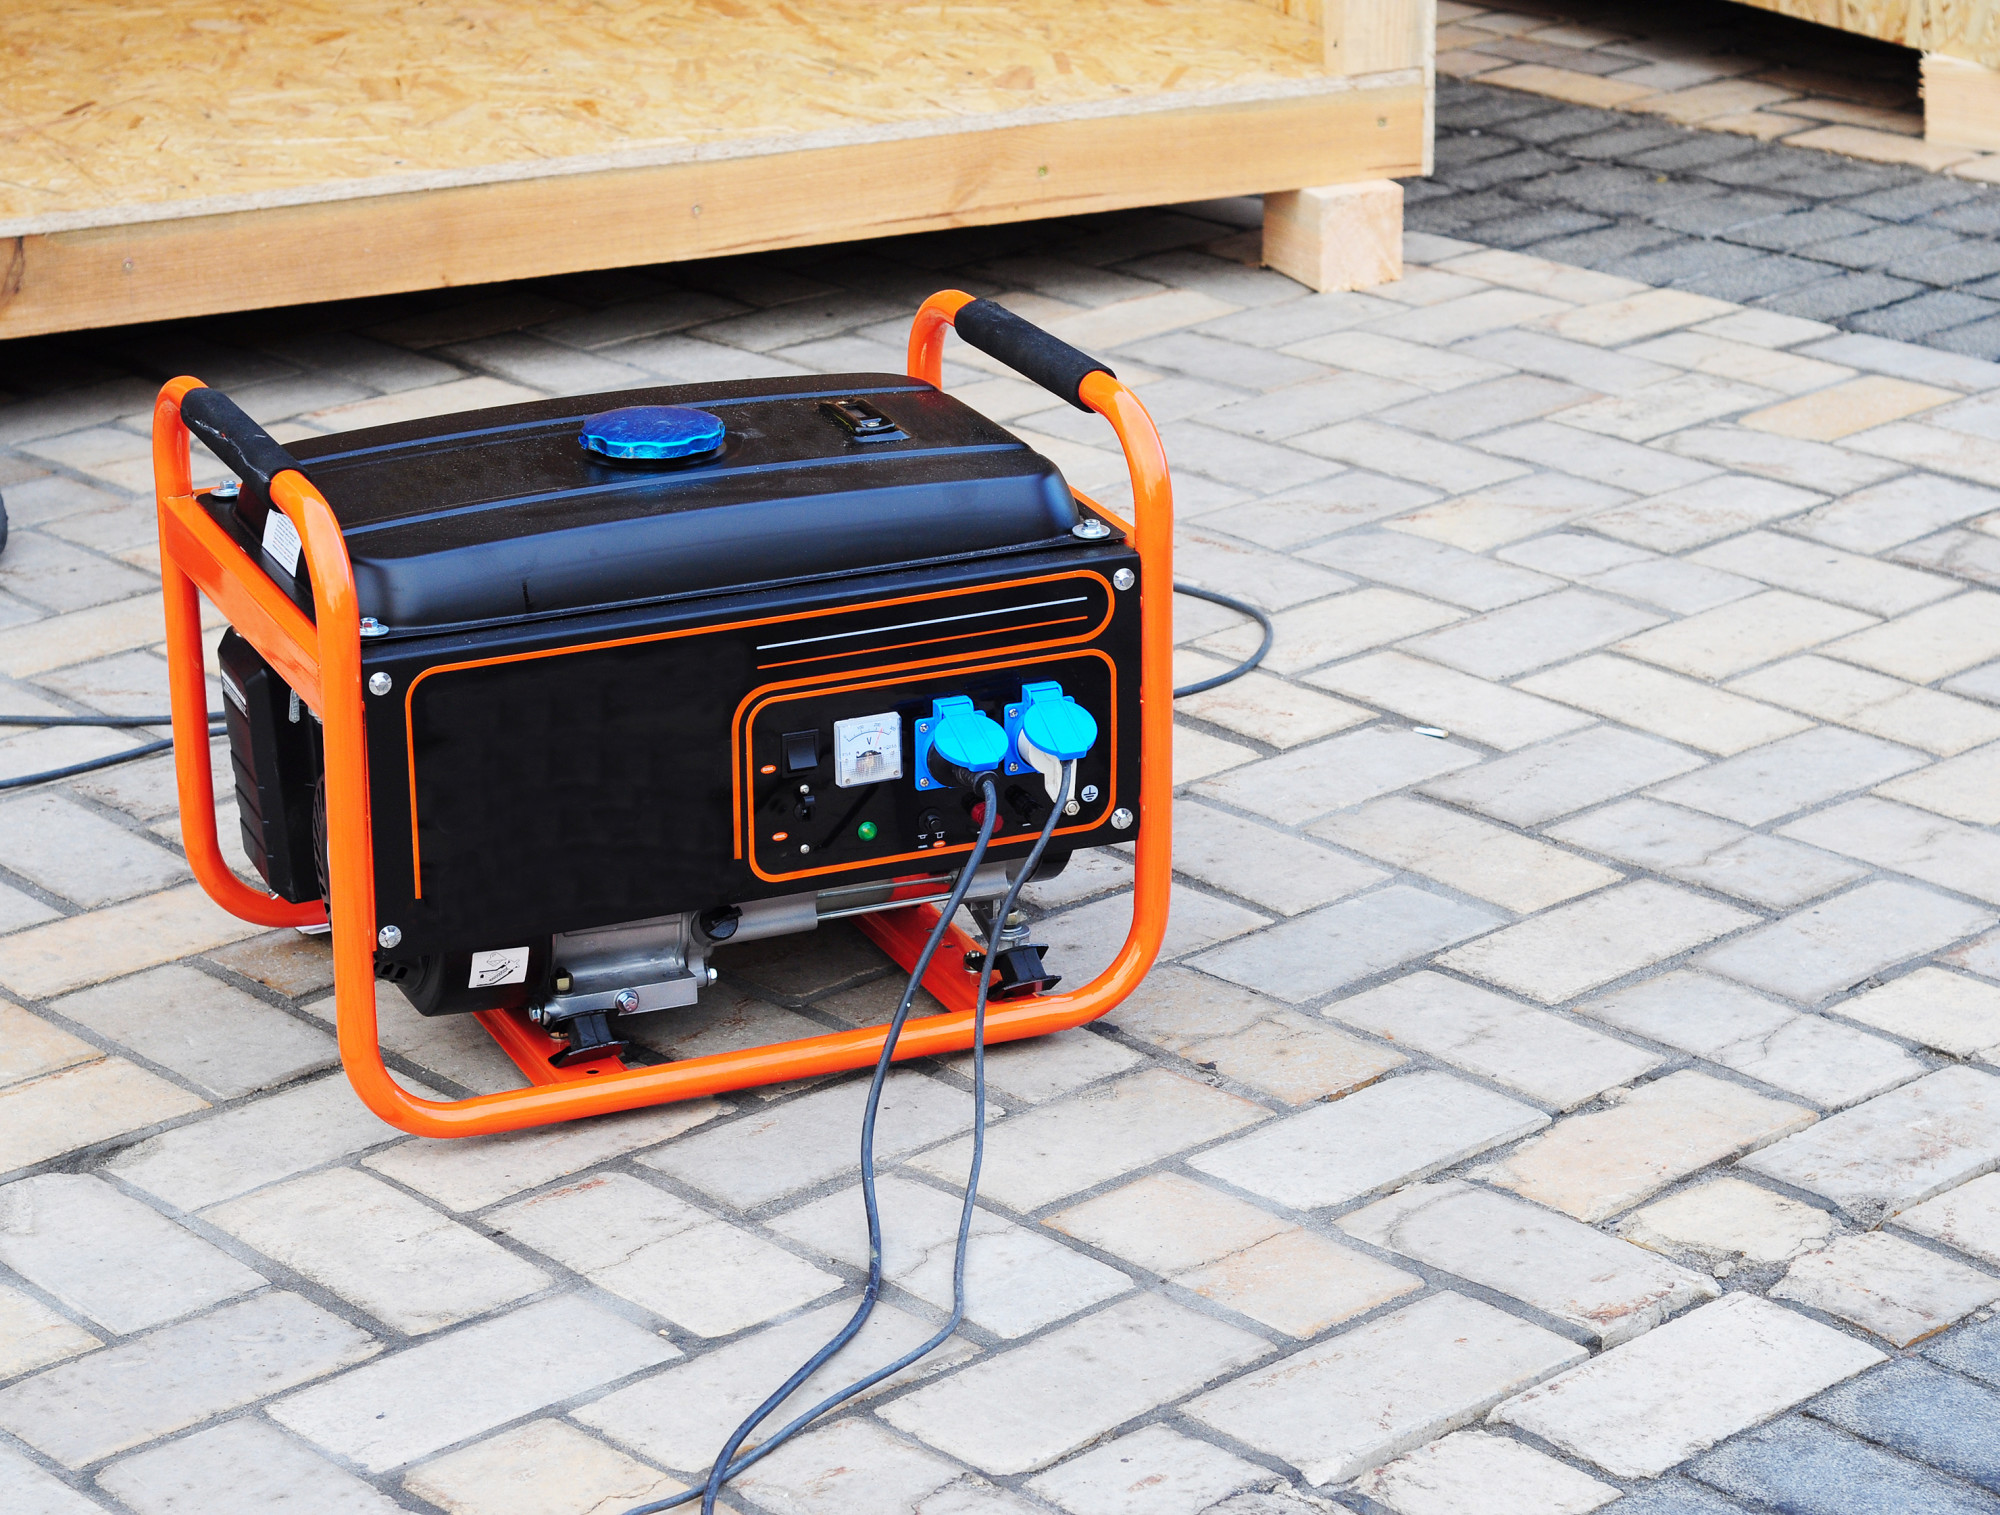 When it comes to ensuring that you stay connected when the power goes out, click here to find out how to buy the best home generator.